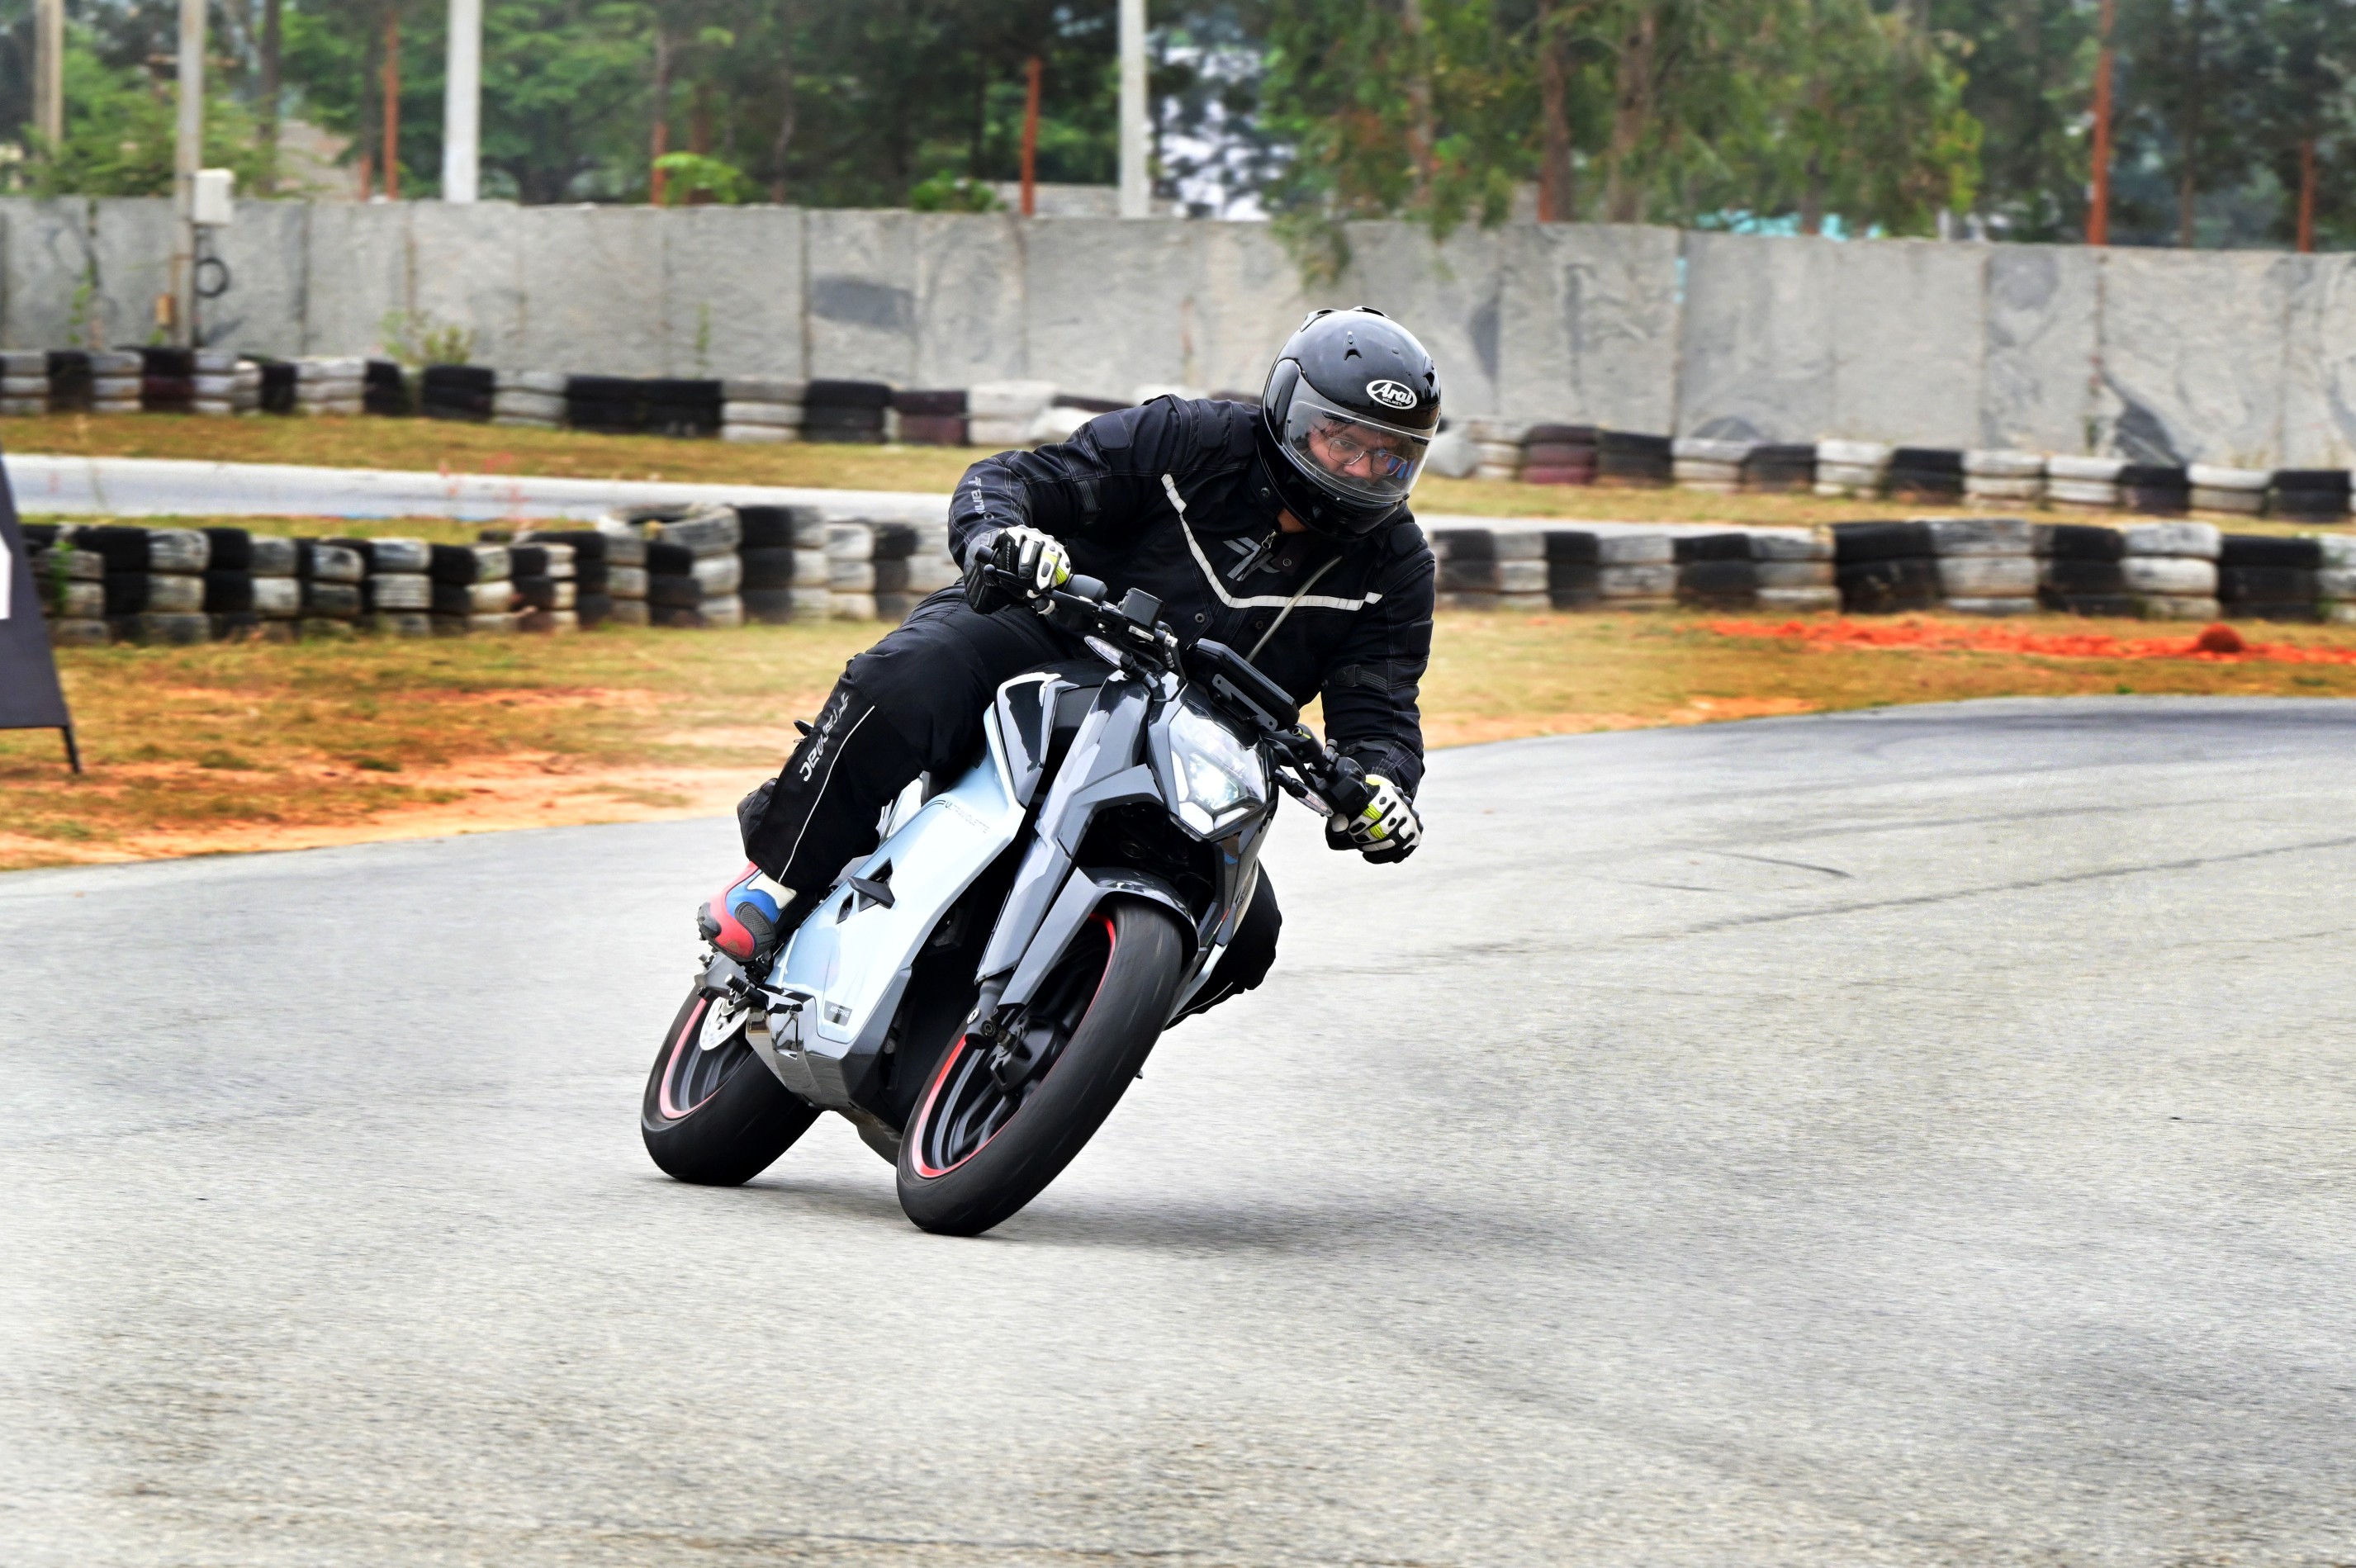 The F77 feels at home on the track with its well-designed electric motorcycle for seamless cornering